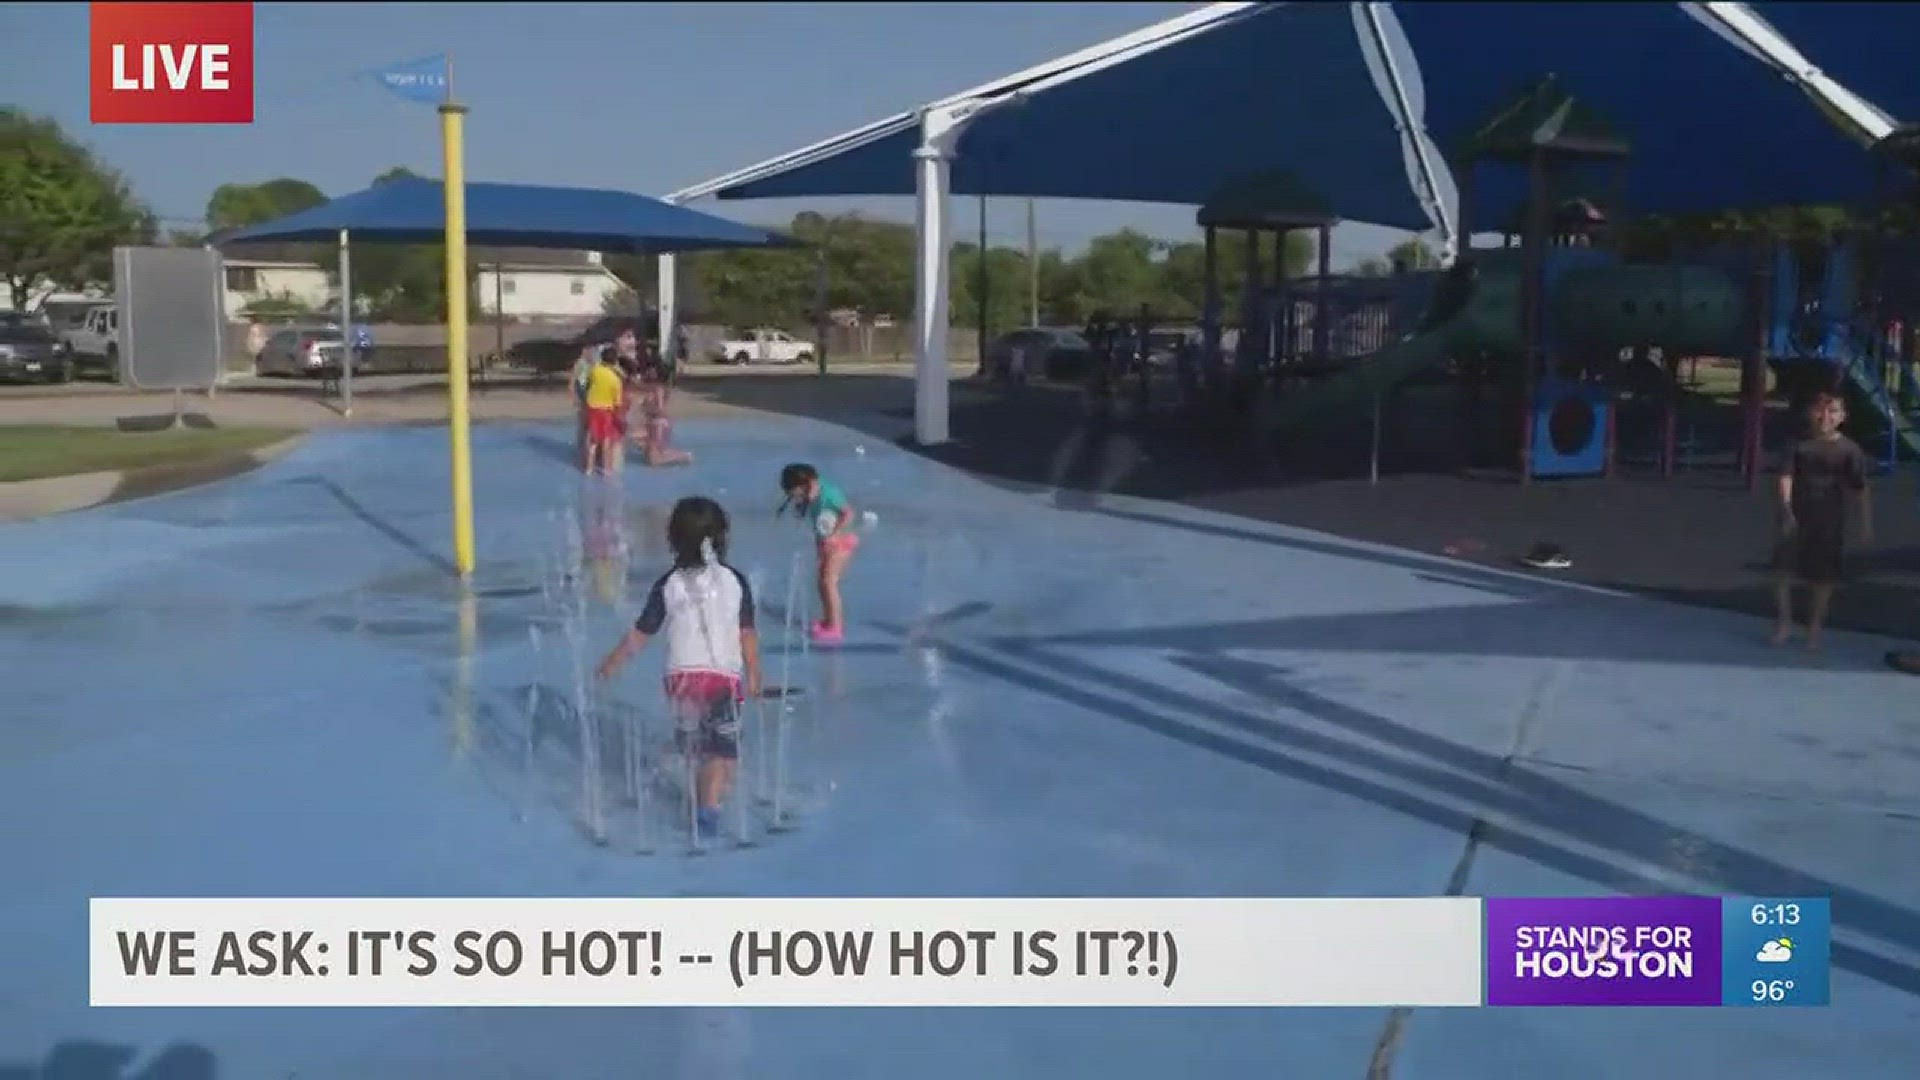 We went to Pearland to ask around ... How hot is it really?